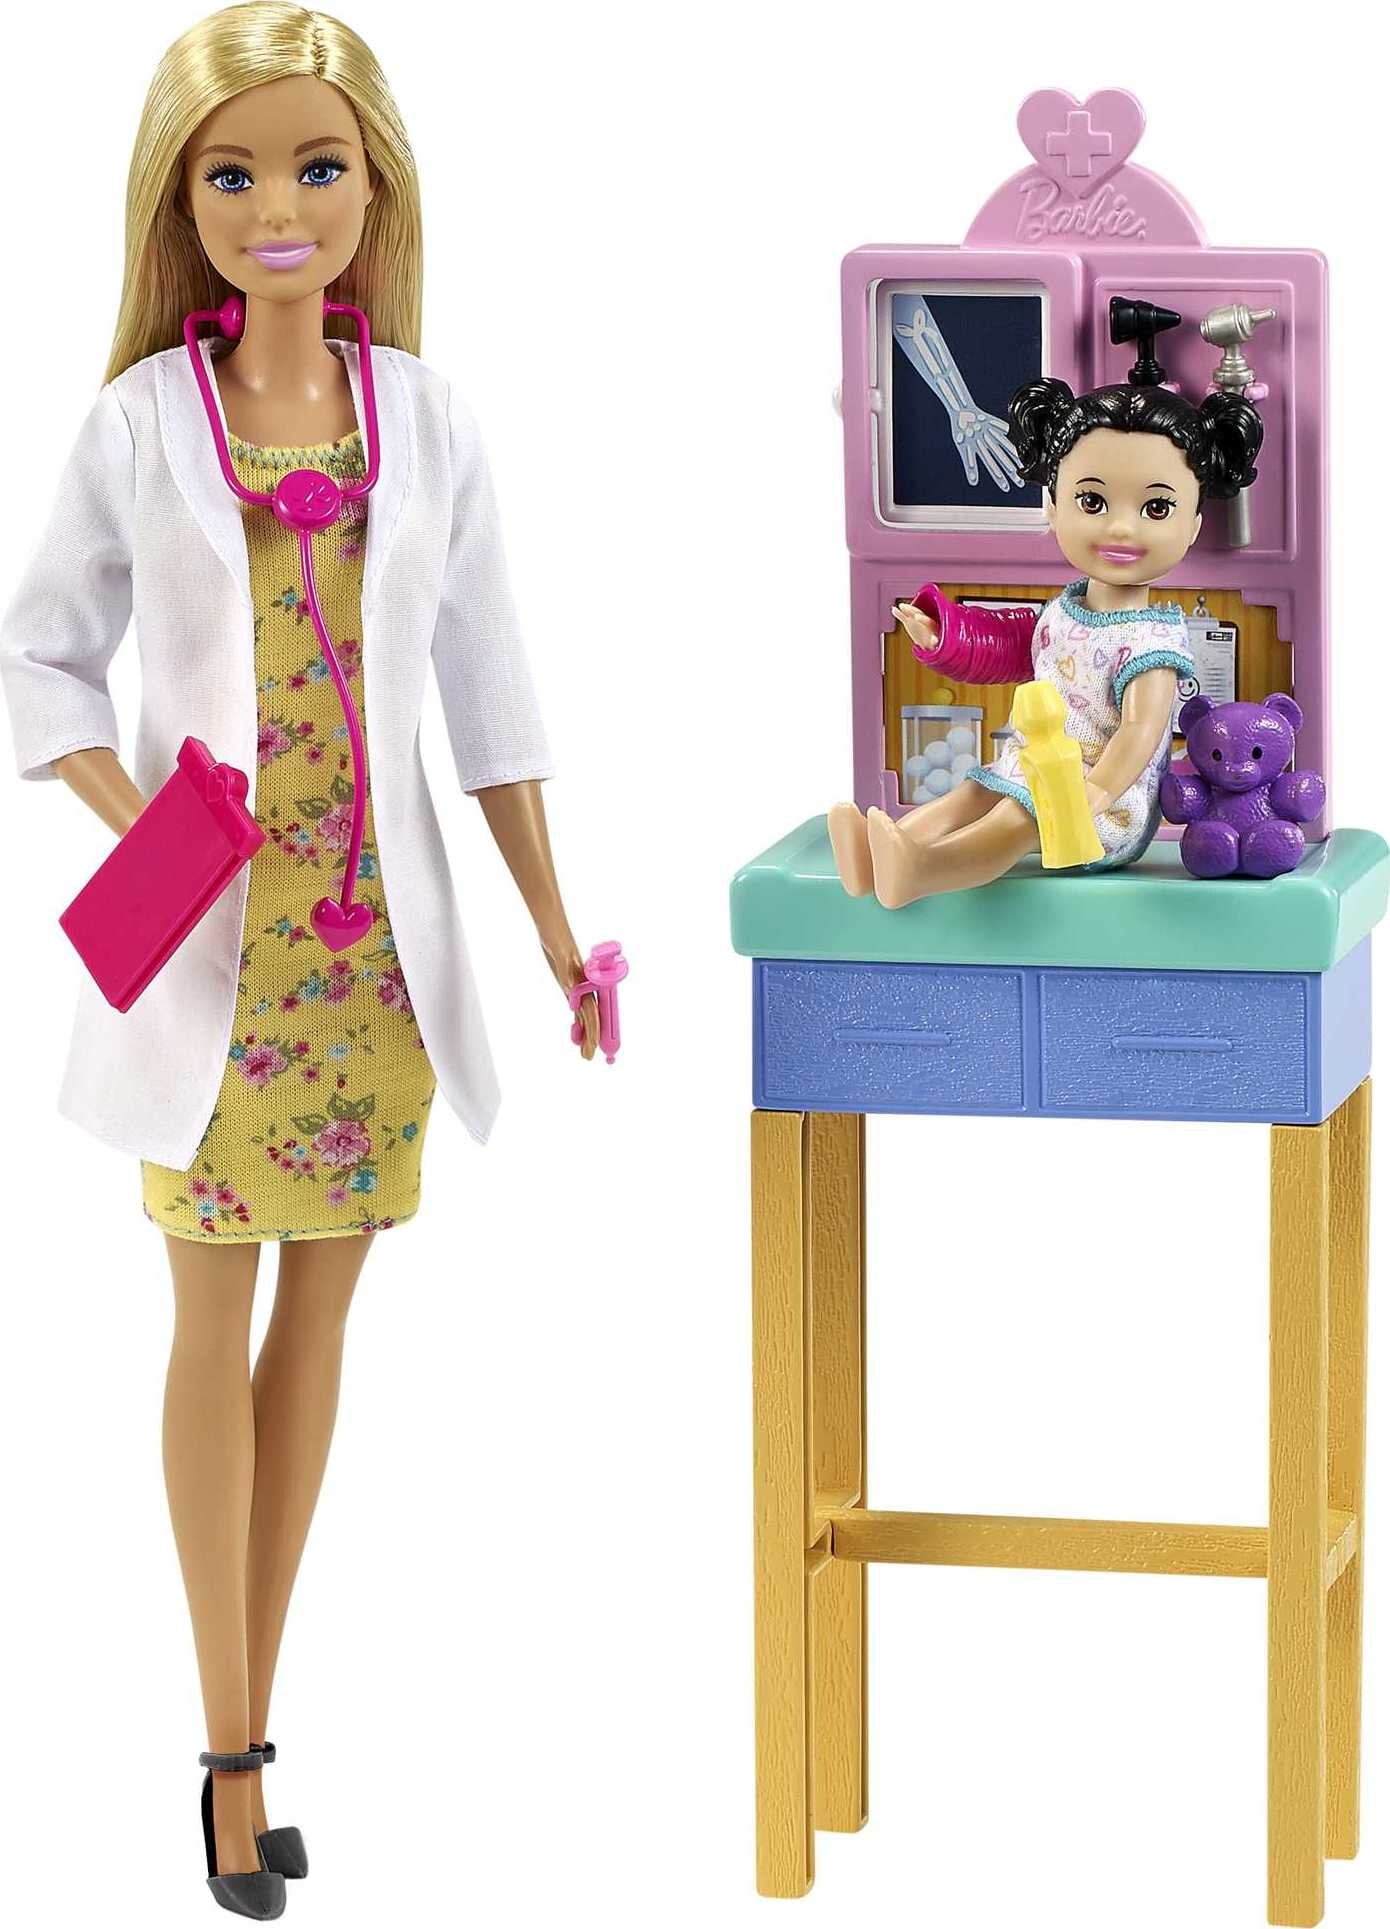  Barbie Doll and Accessories Playset with Blonde Doll